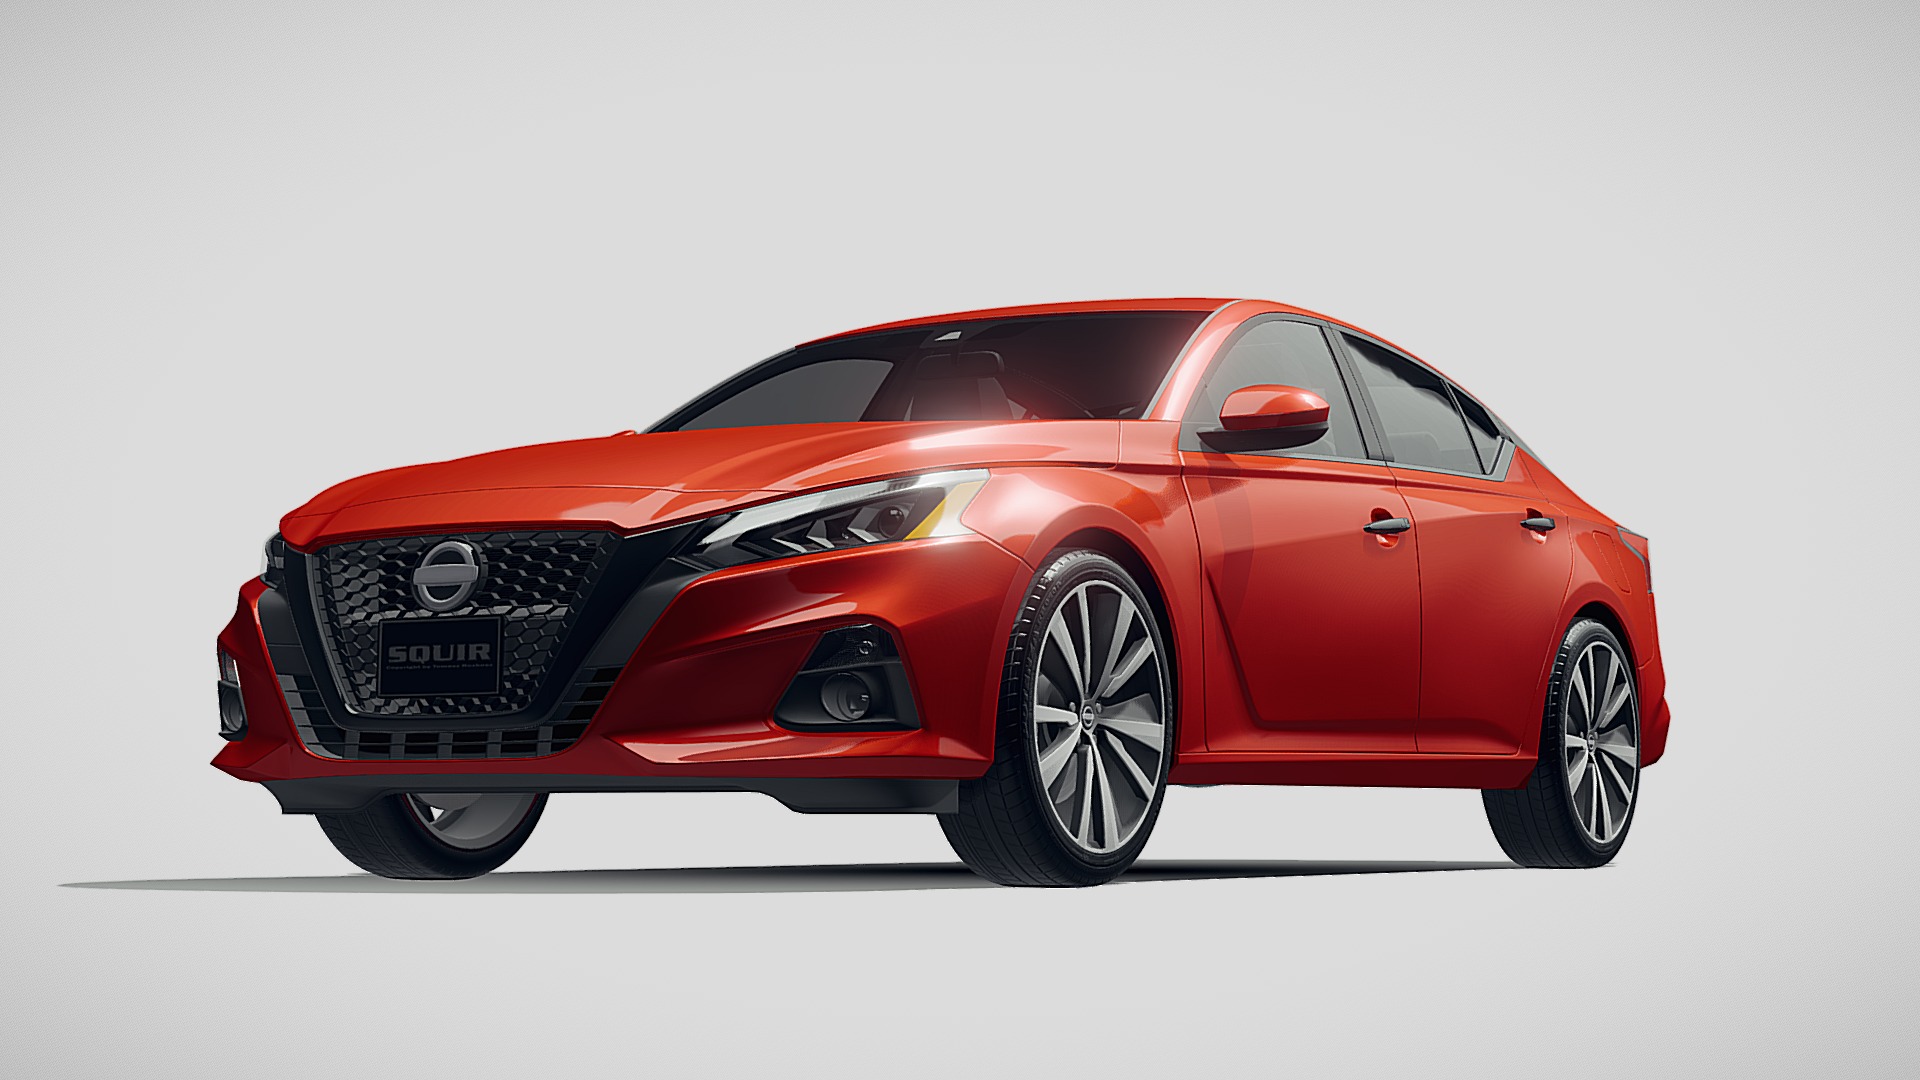 3D model Nissan Altima 2019 - This is a 3D model of the Nissan Altima 2019. The 3D model is about a red sports car.